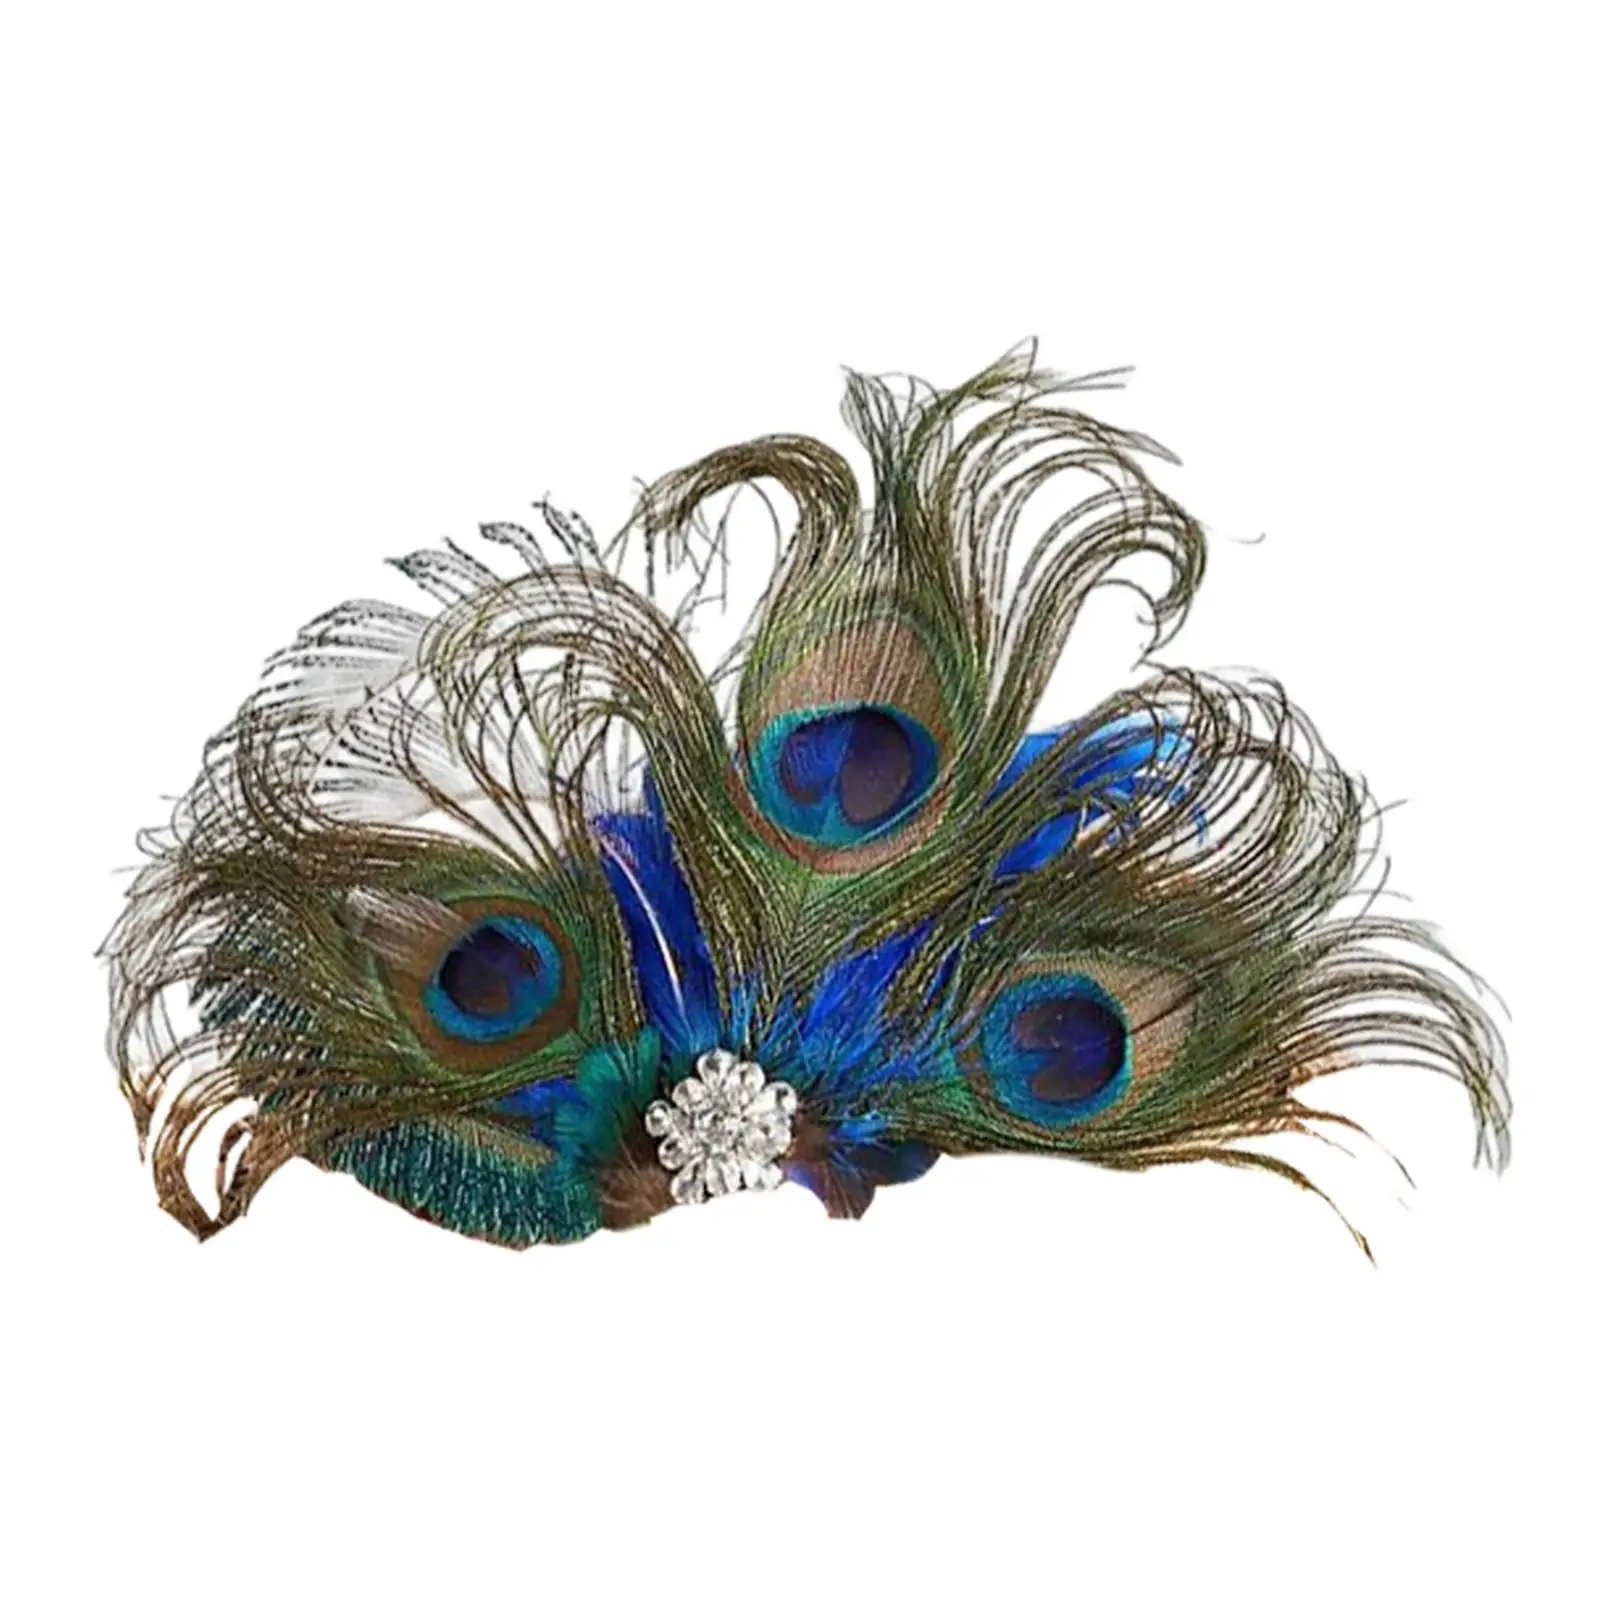 Women Peacock Feather Hair Clip Fascinator 1920S Vintage Elegant with Rhinestones Hairpin Headpiece for Wedding Accessories